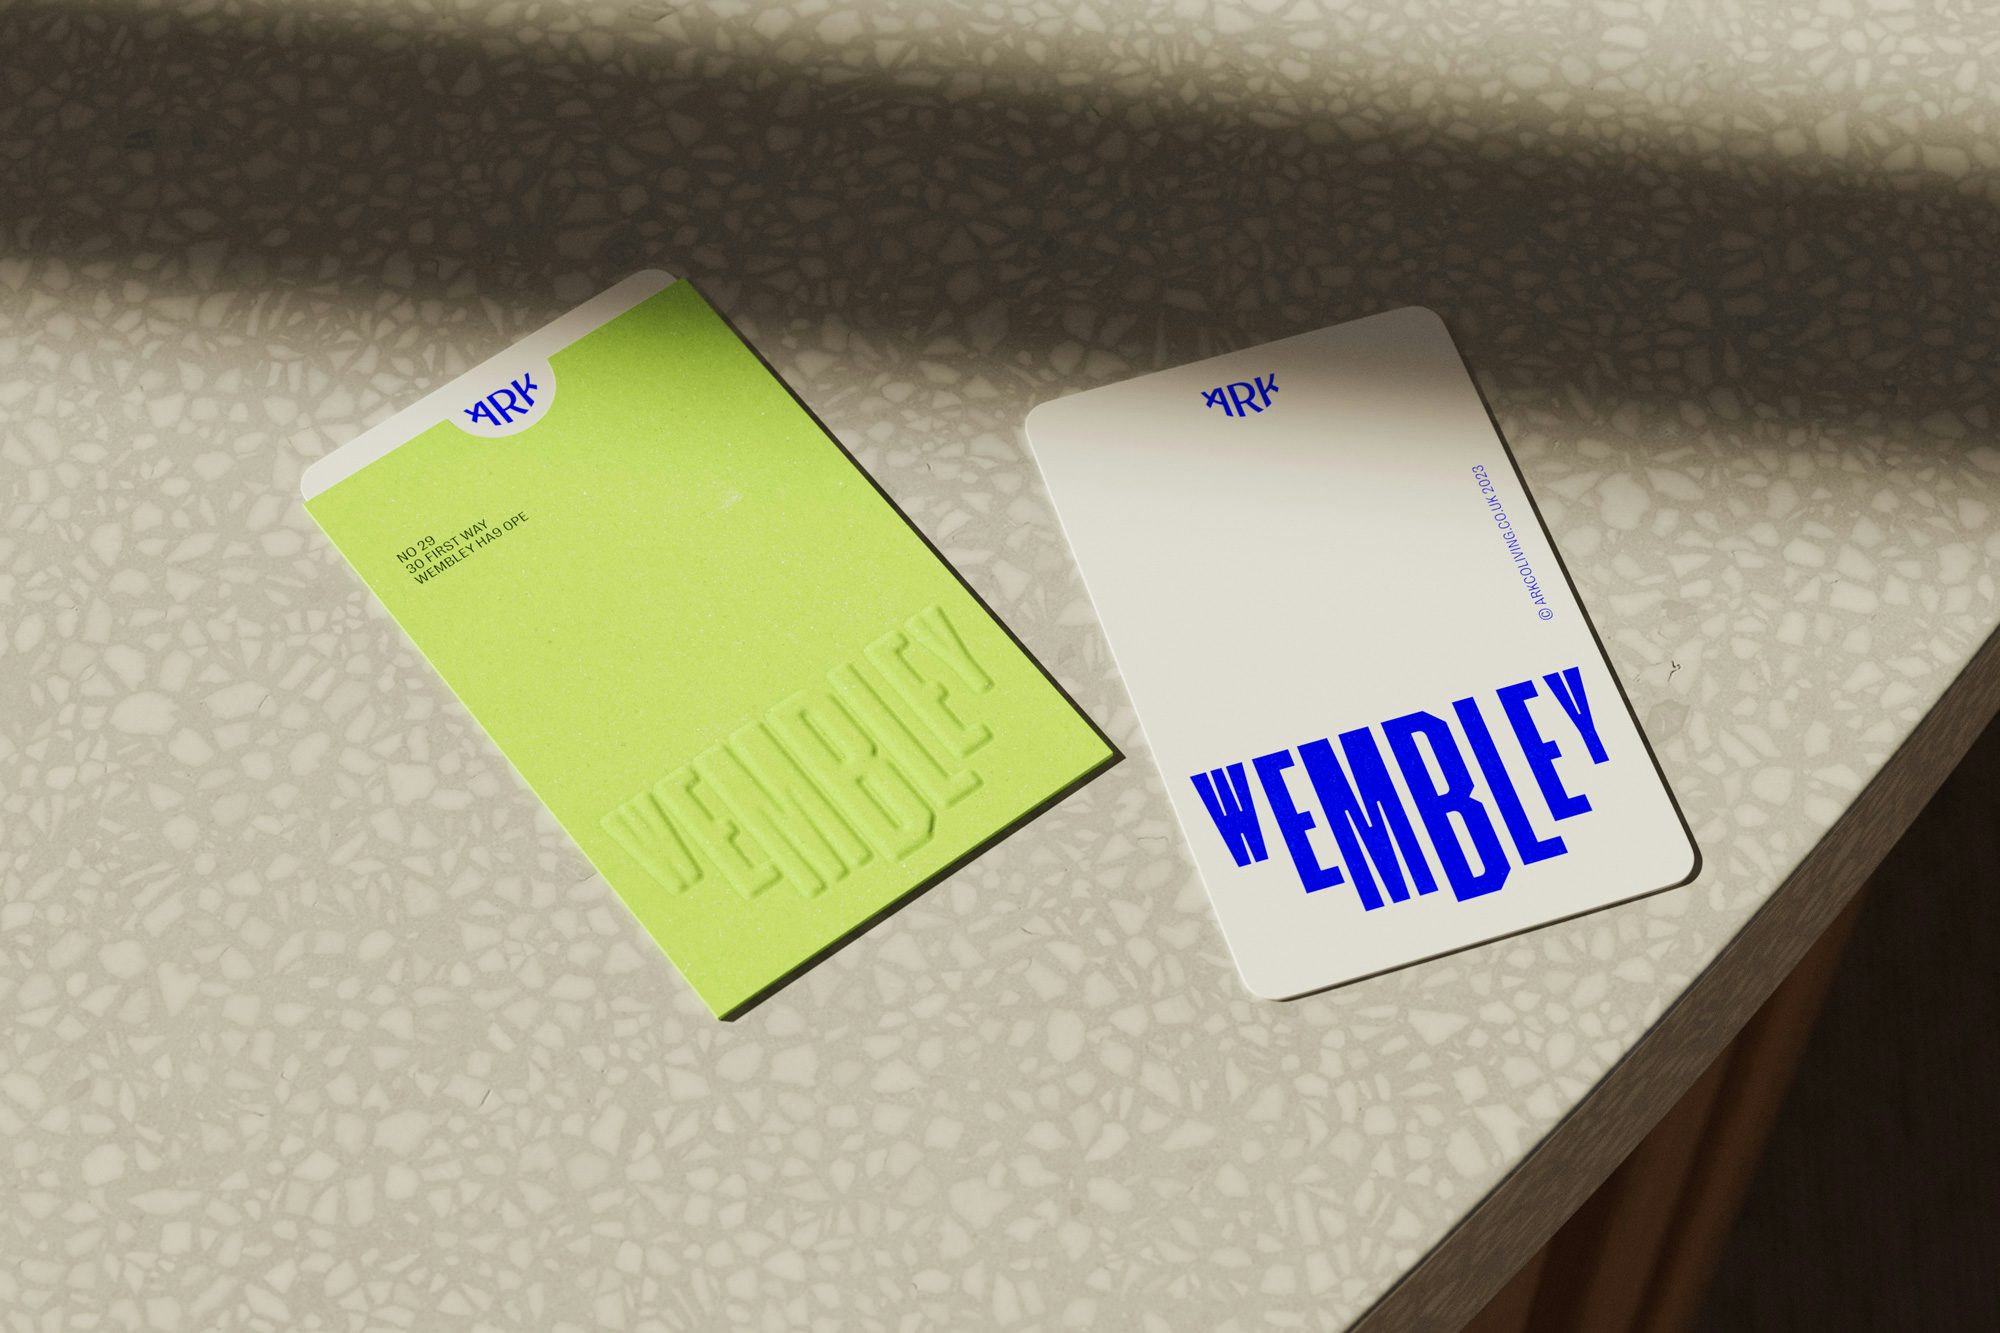 Image shows Ark branding on two pass cards, one lime green, one white with blue text, both featuring the word 'Wembley' arranged the shape of a smile